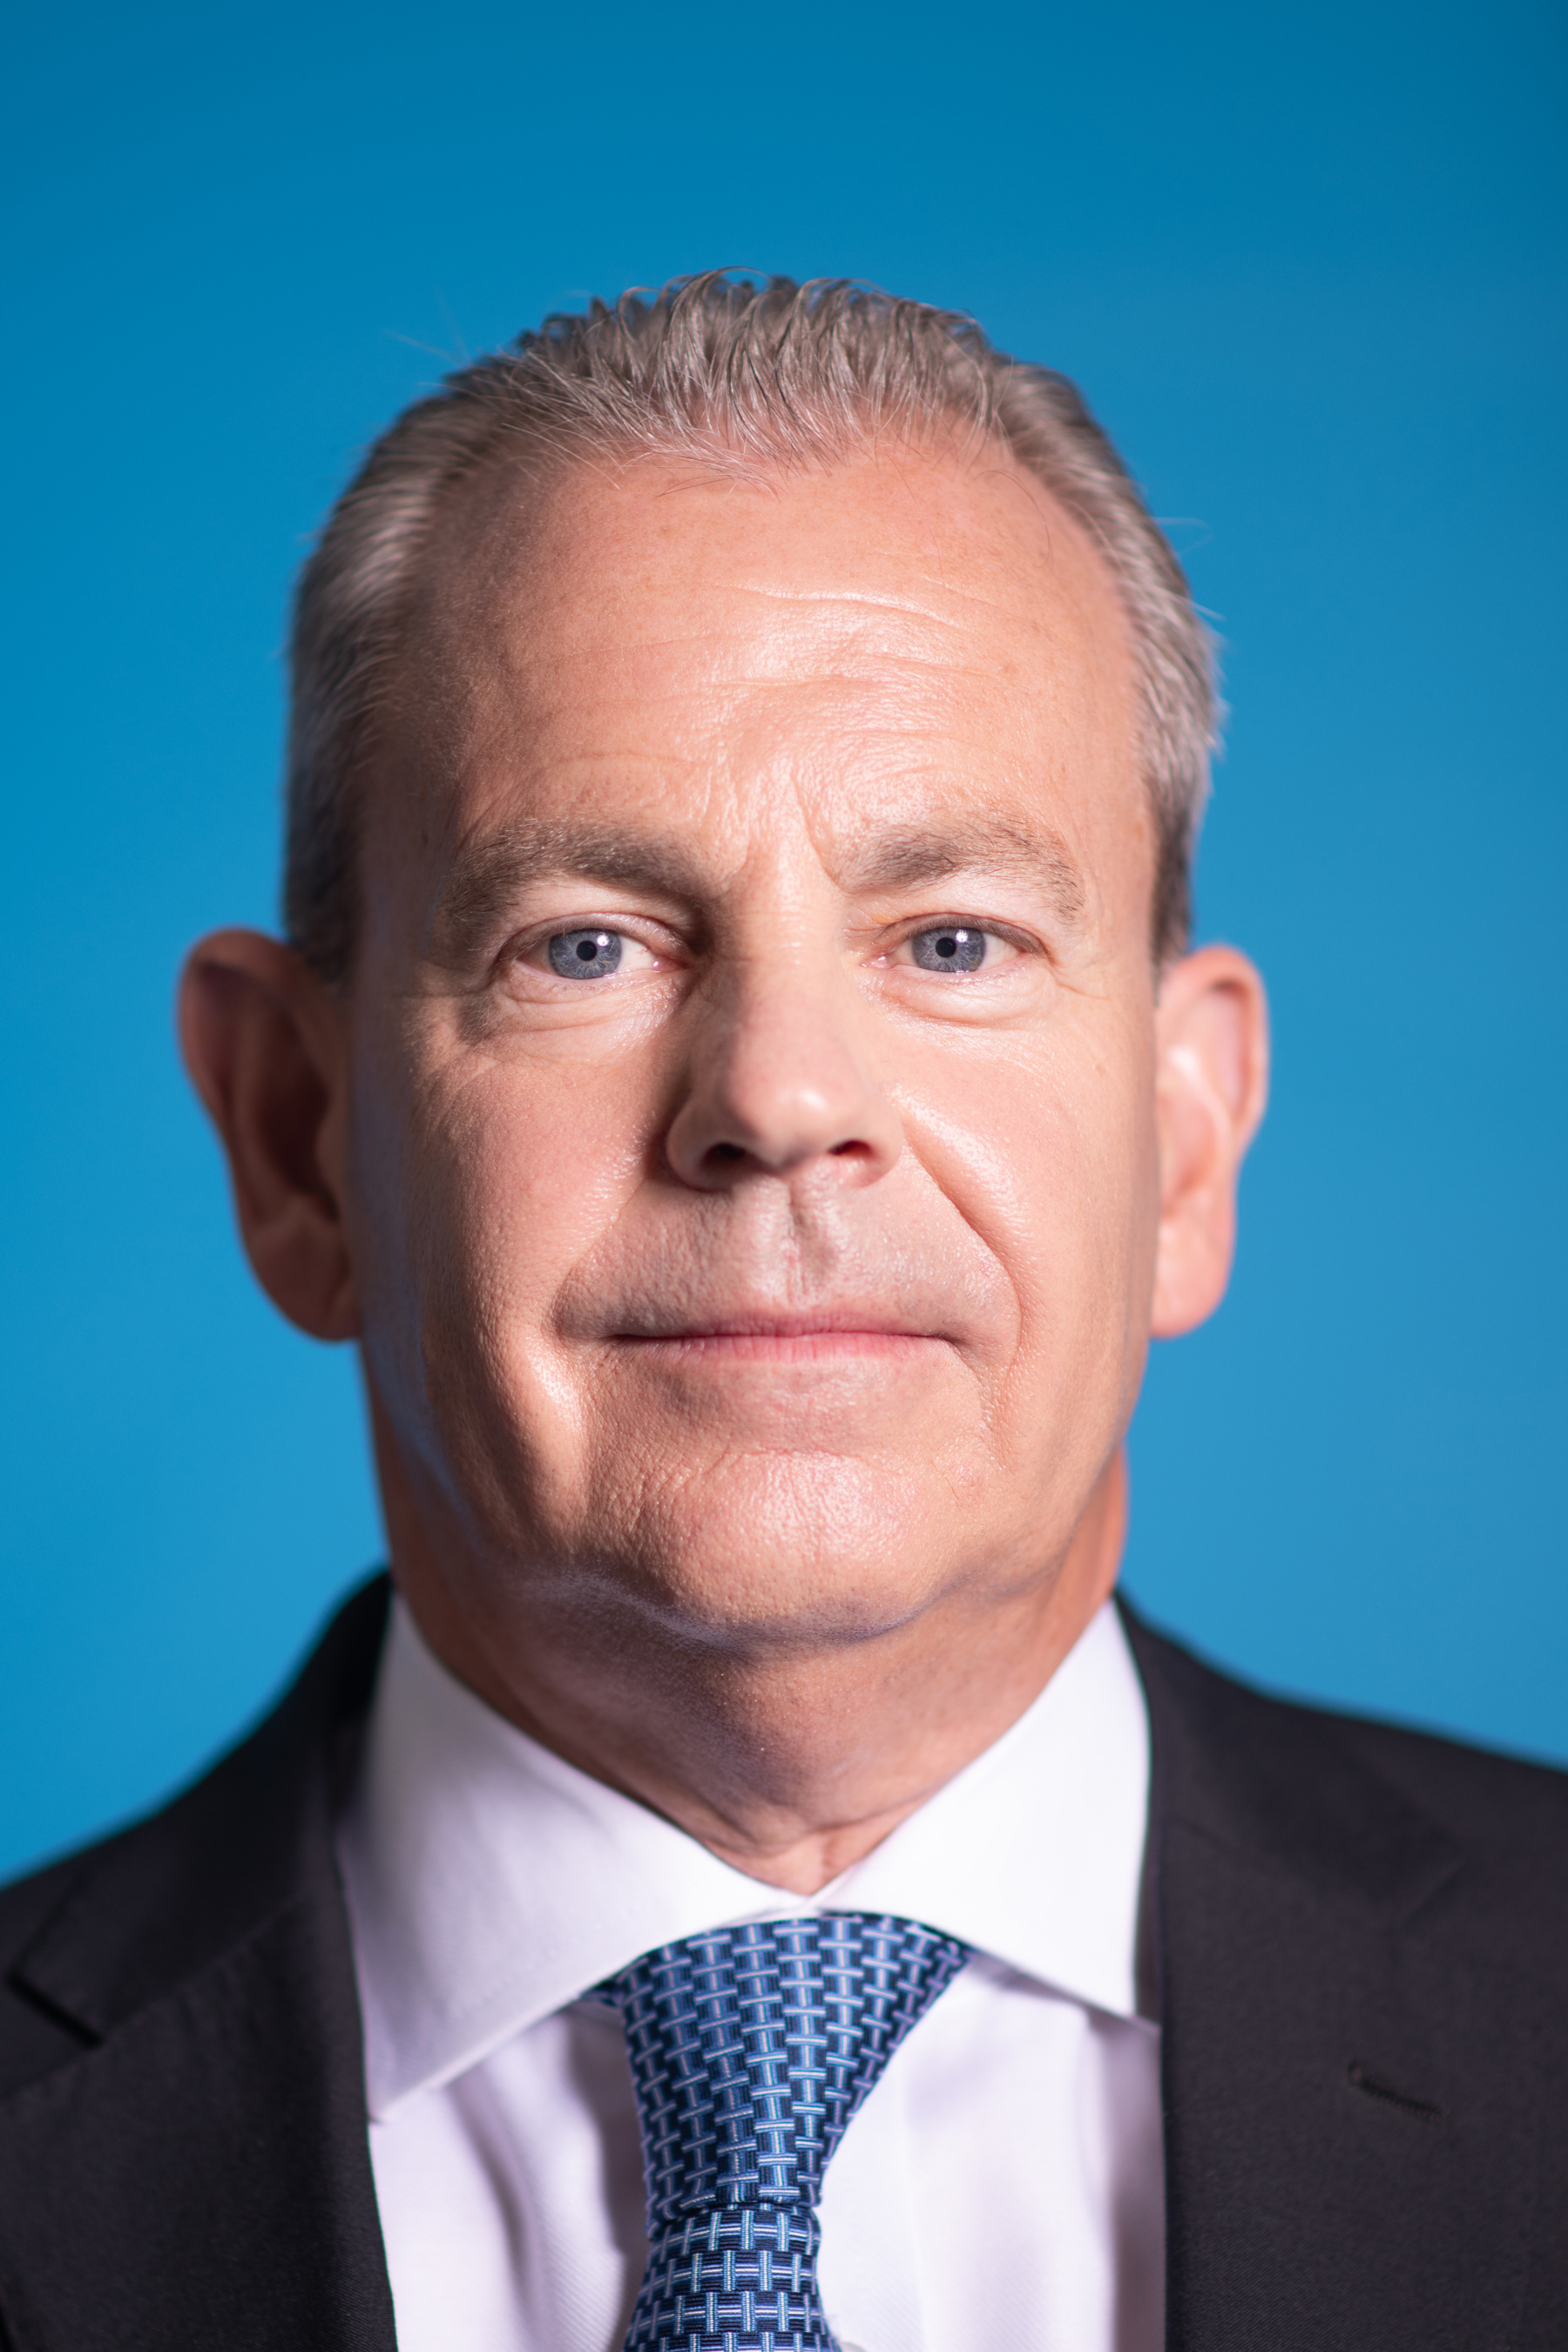 Headshot of Mark Hislop looking at the camera wearing a white shirt, blue patterned tie and black suit jacket